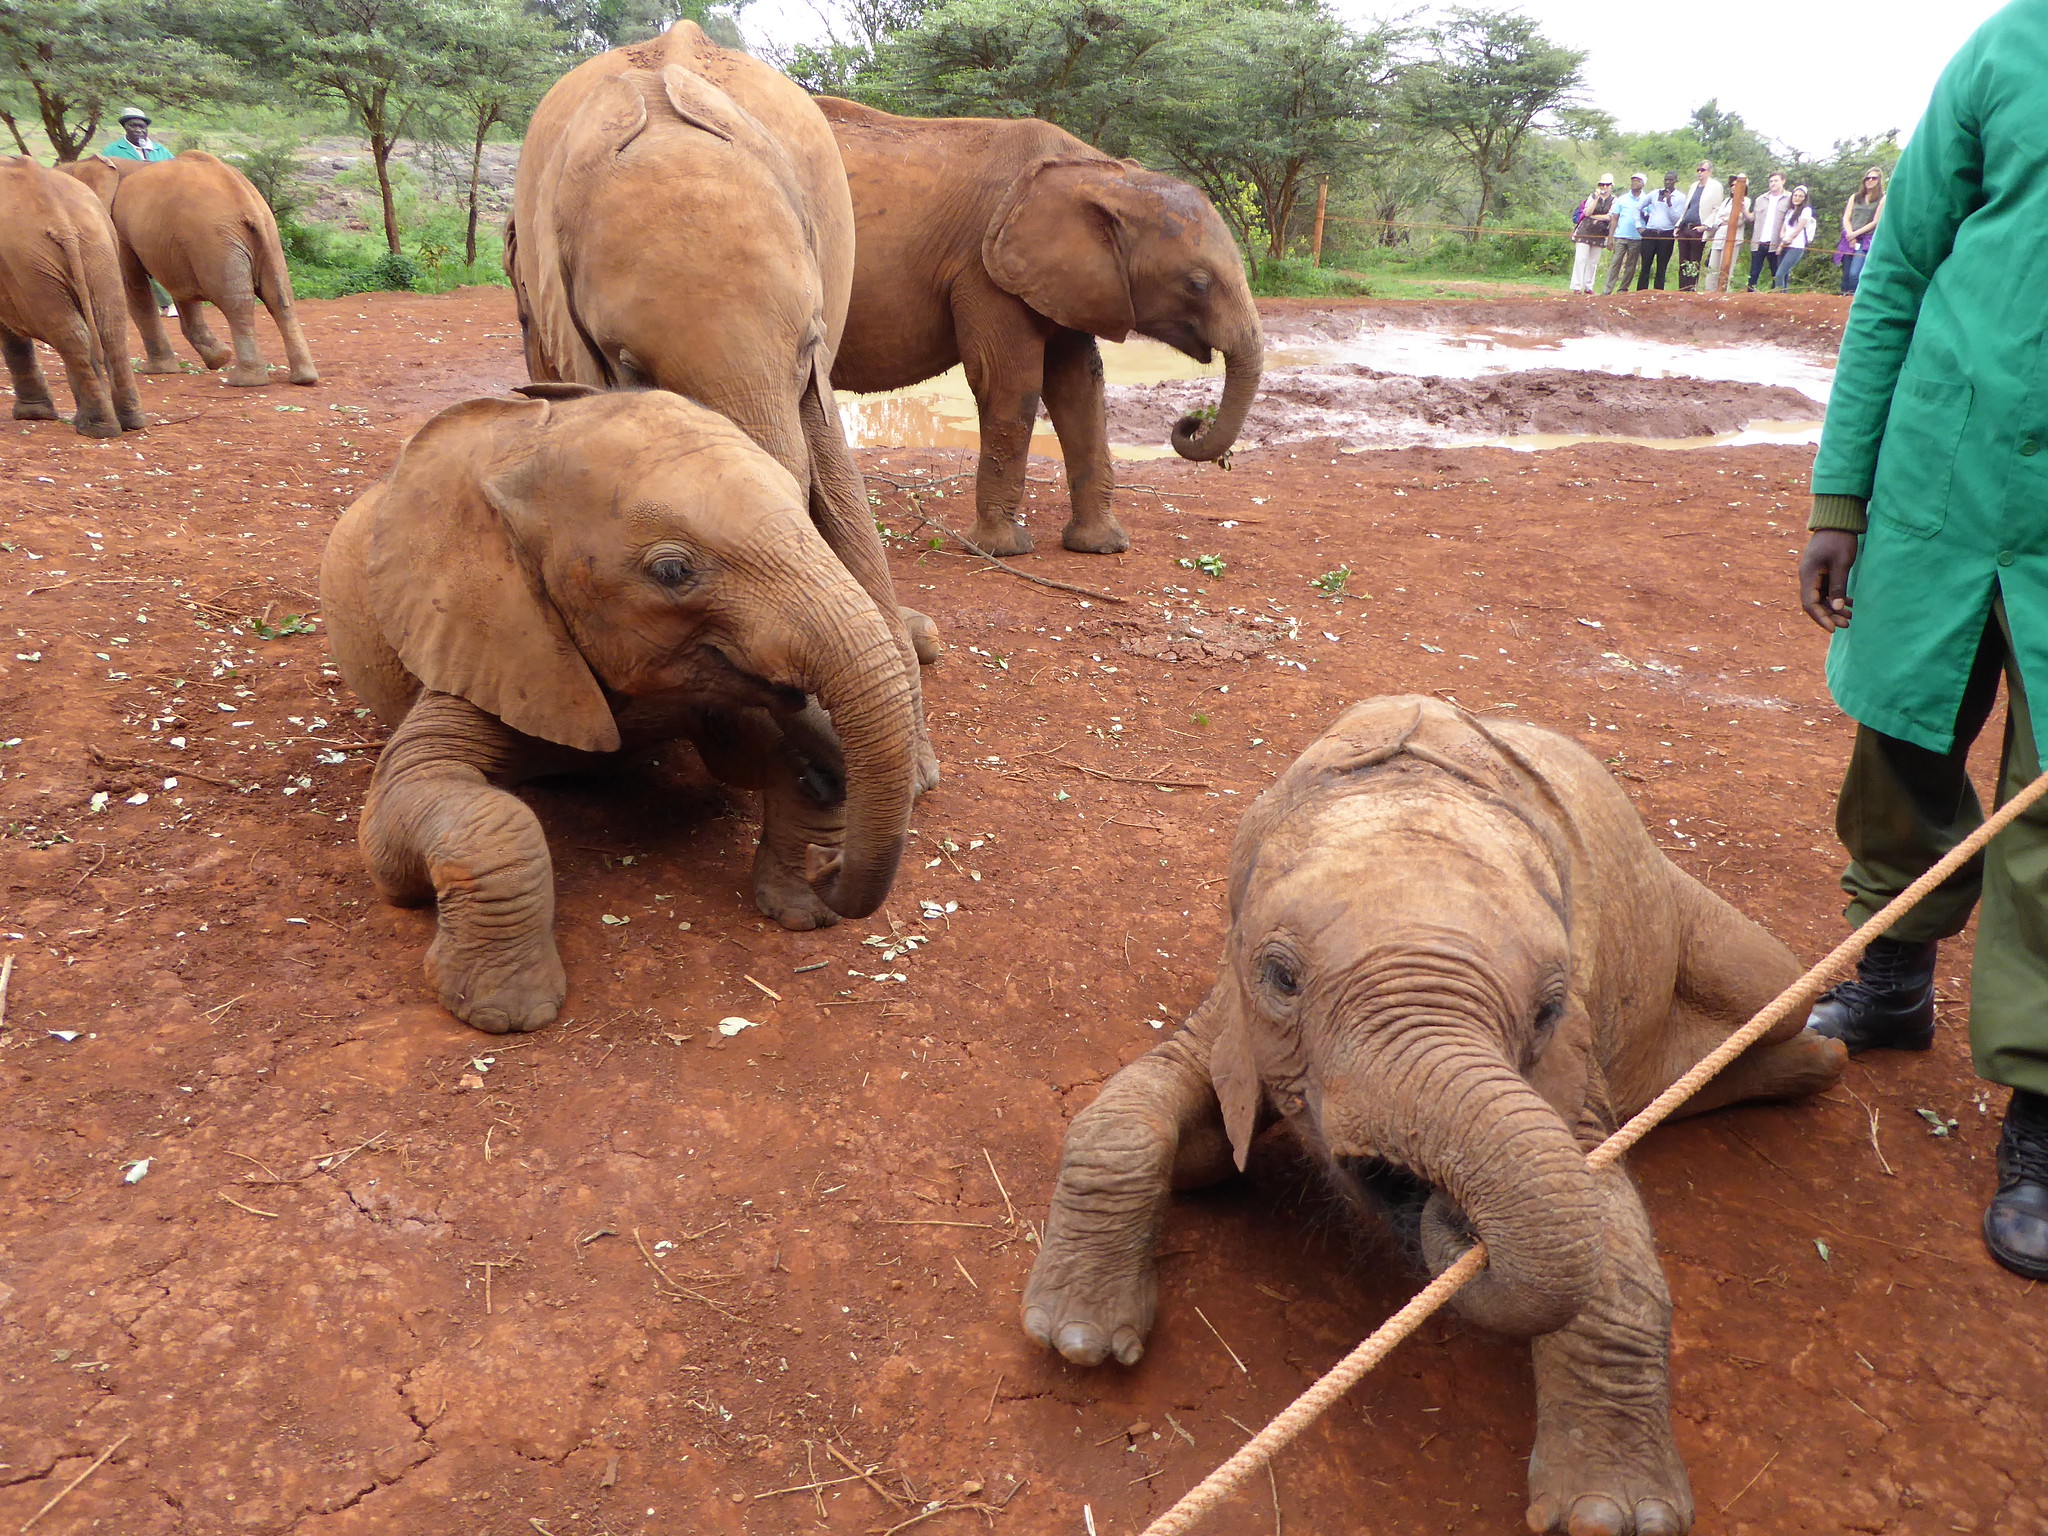 A young elephant plays with a stick at Sheldrick Wildlife Trust's Orphans' Project